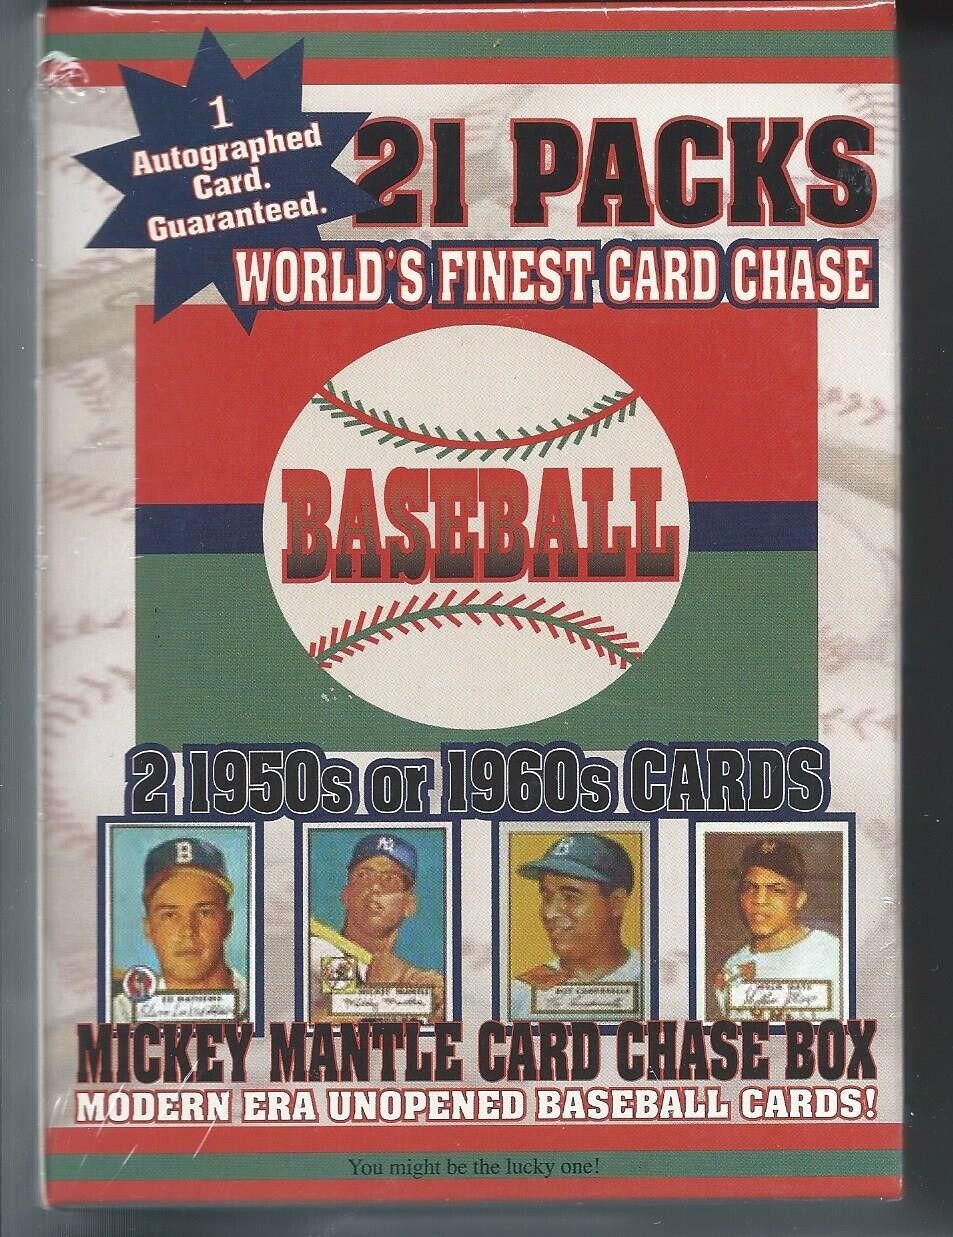 1952 Worlds Greatest Card Chase Box- 21 packs+auto+ 2 cards 50/60's